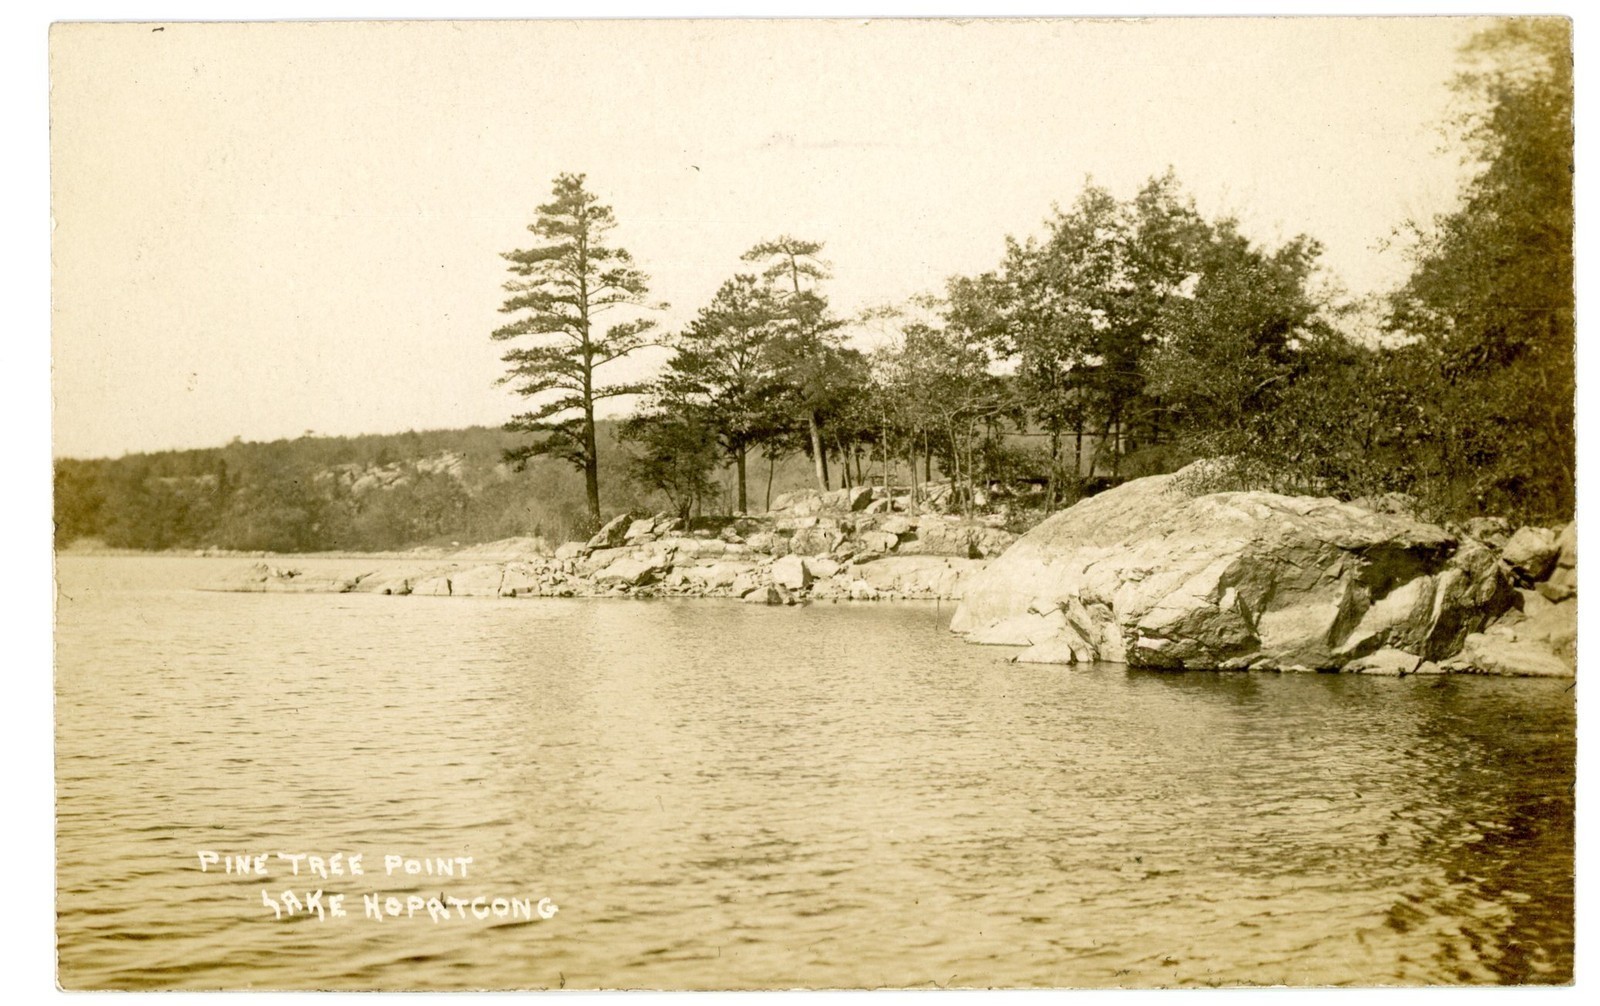 Lake Hopatcong - A view of Pine Tree Point - c 1910